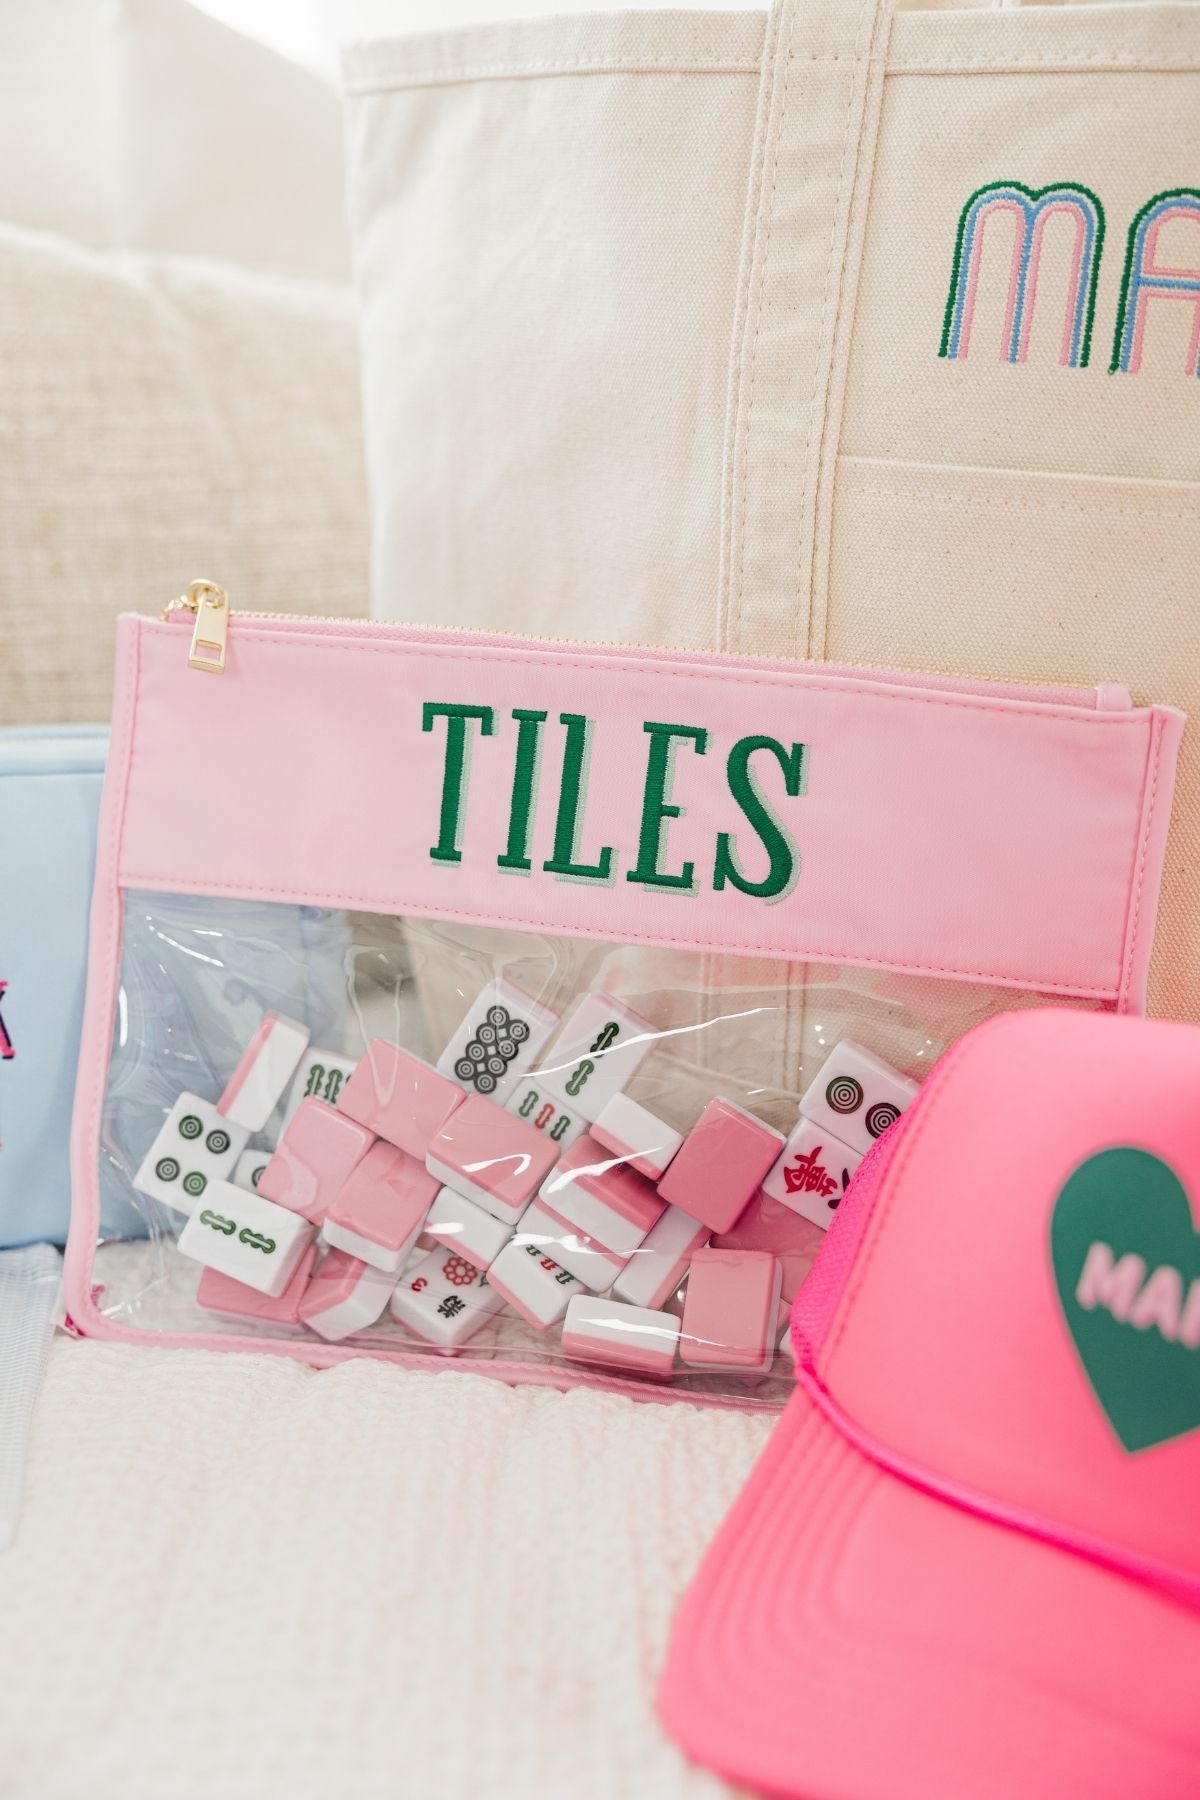 Three see-through pouches with Mahjong-inspired sayings embroidered on them